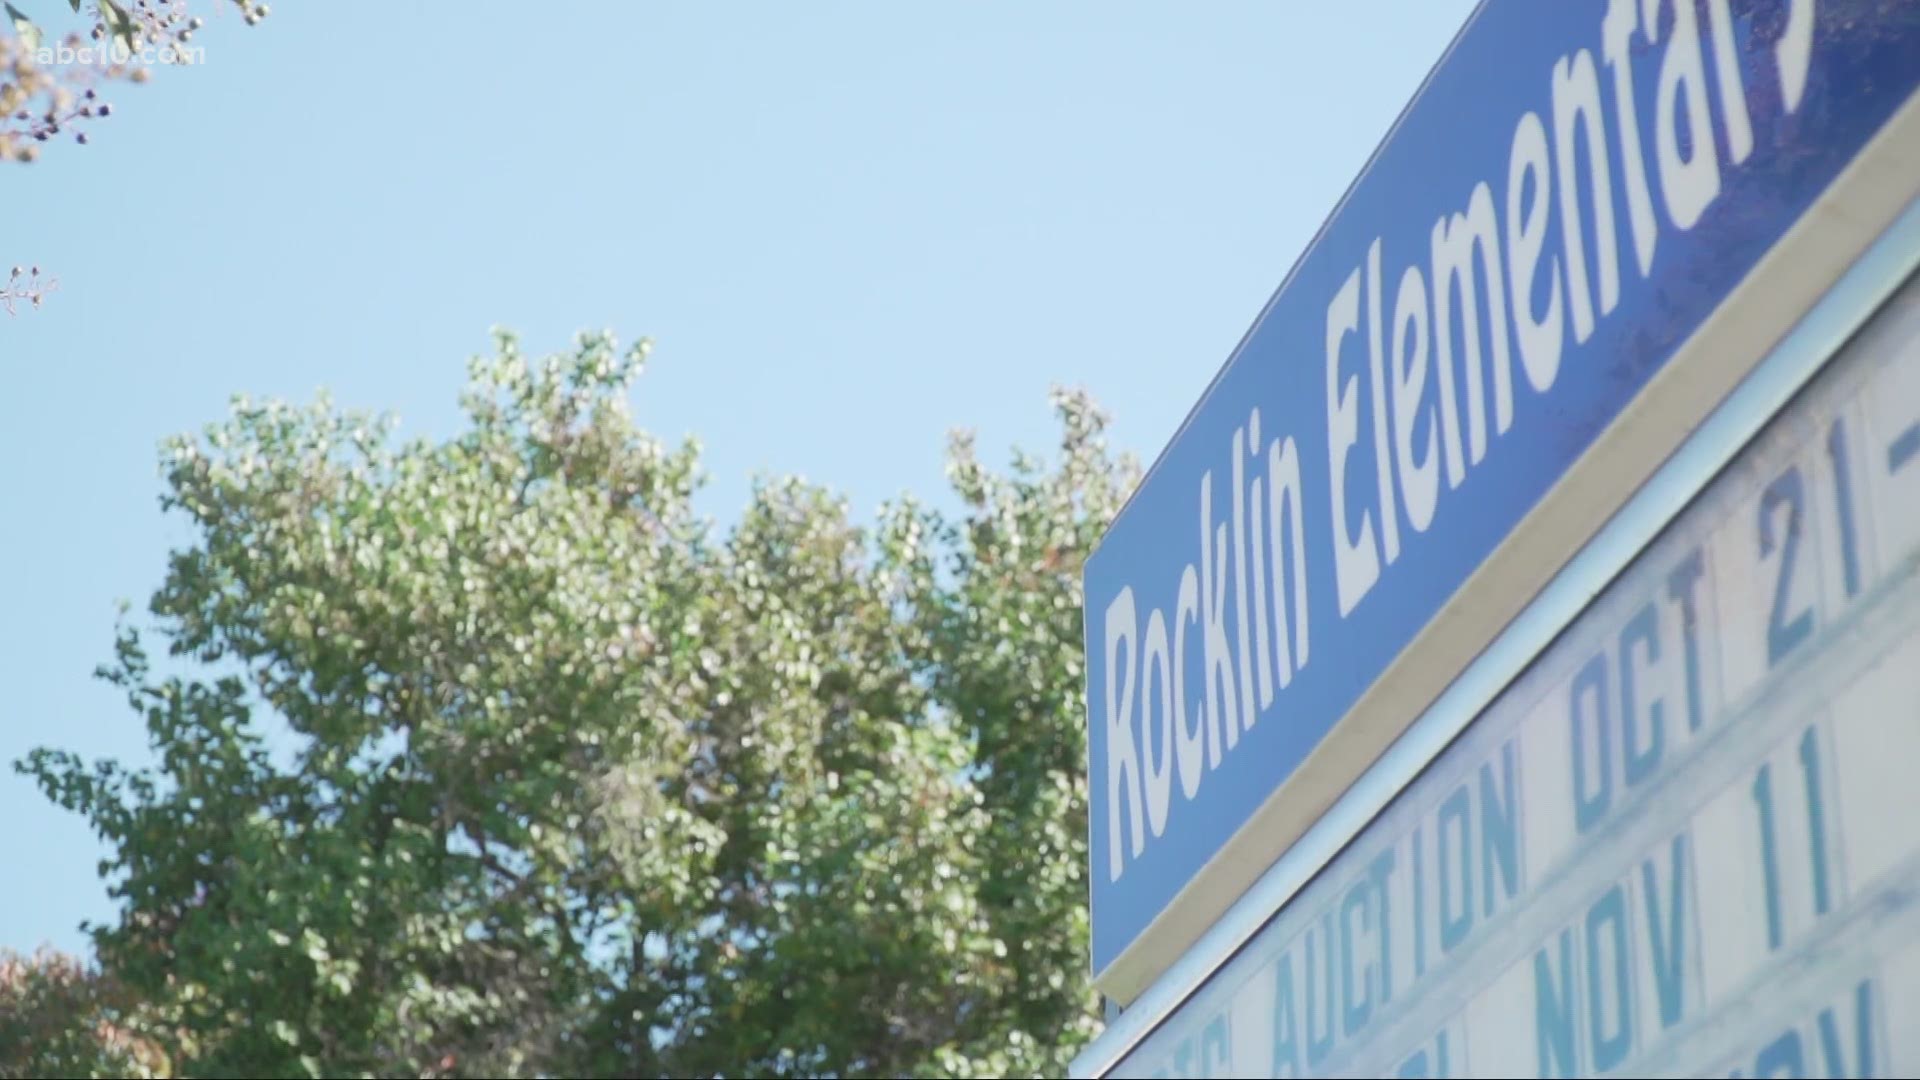 Rocklin Unified School District is voting on when the schools will go back to in-person learning full time, even though teachers do not agree.